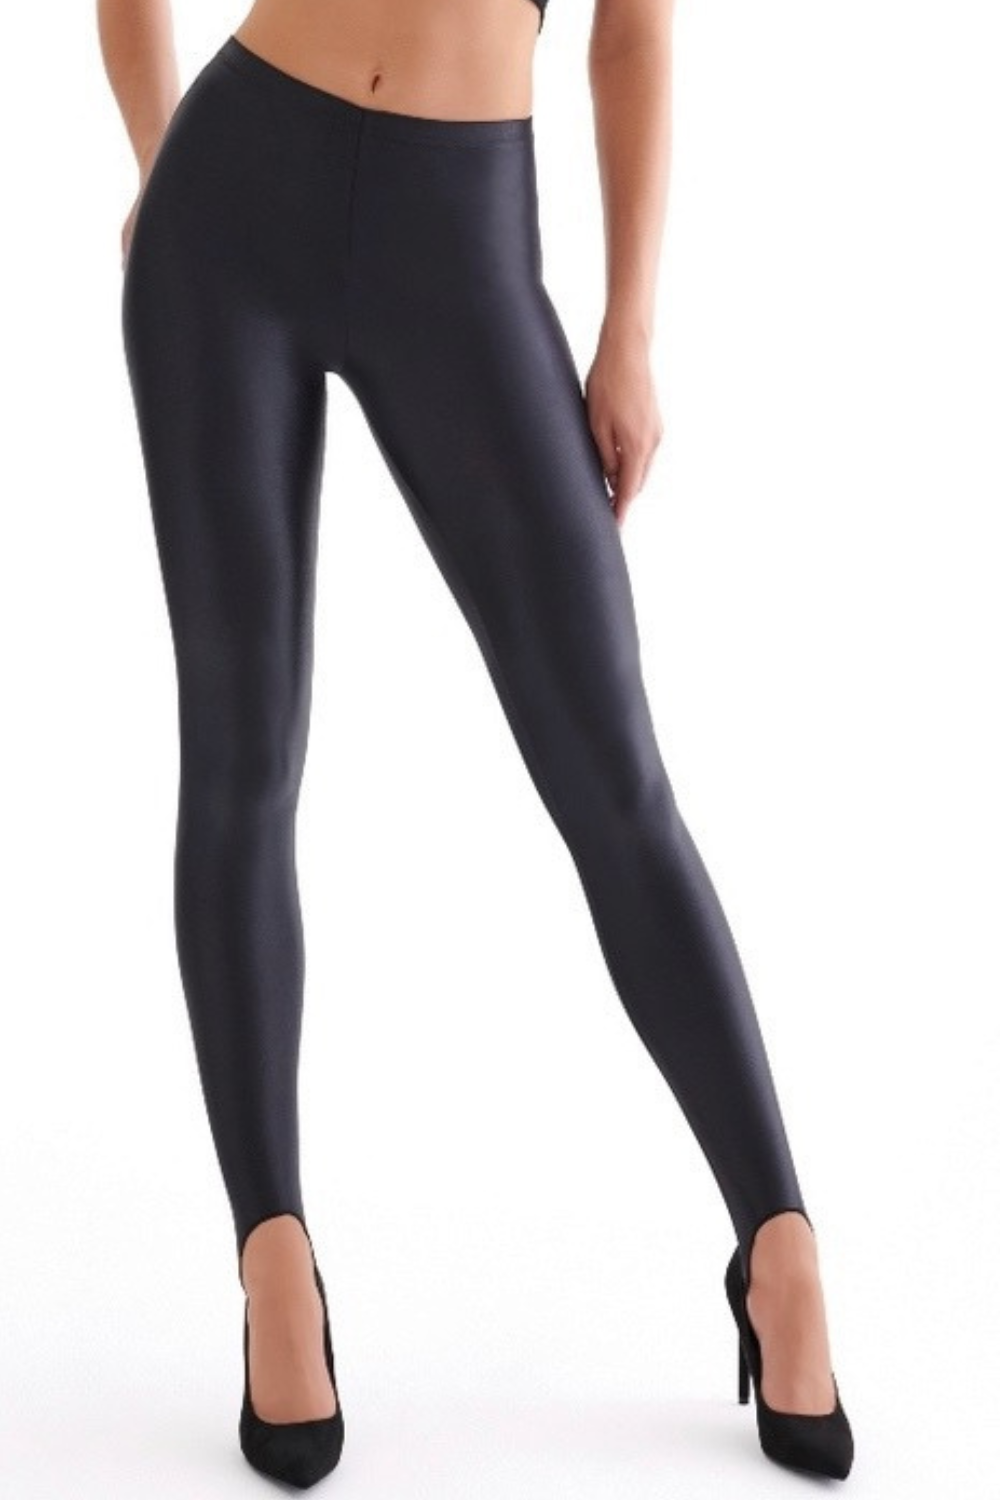 Commando Faux Patent Leggings – Naughty Knickers